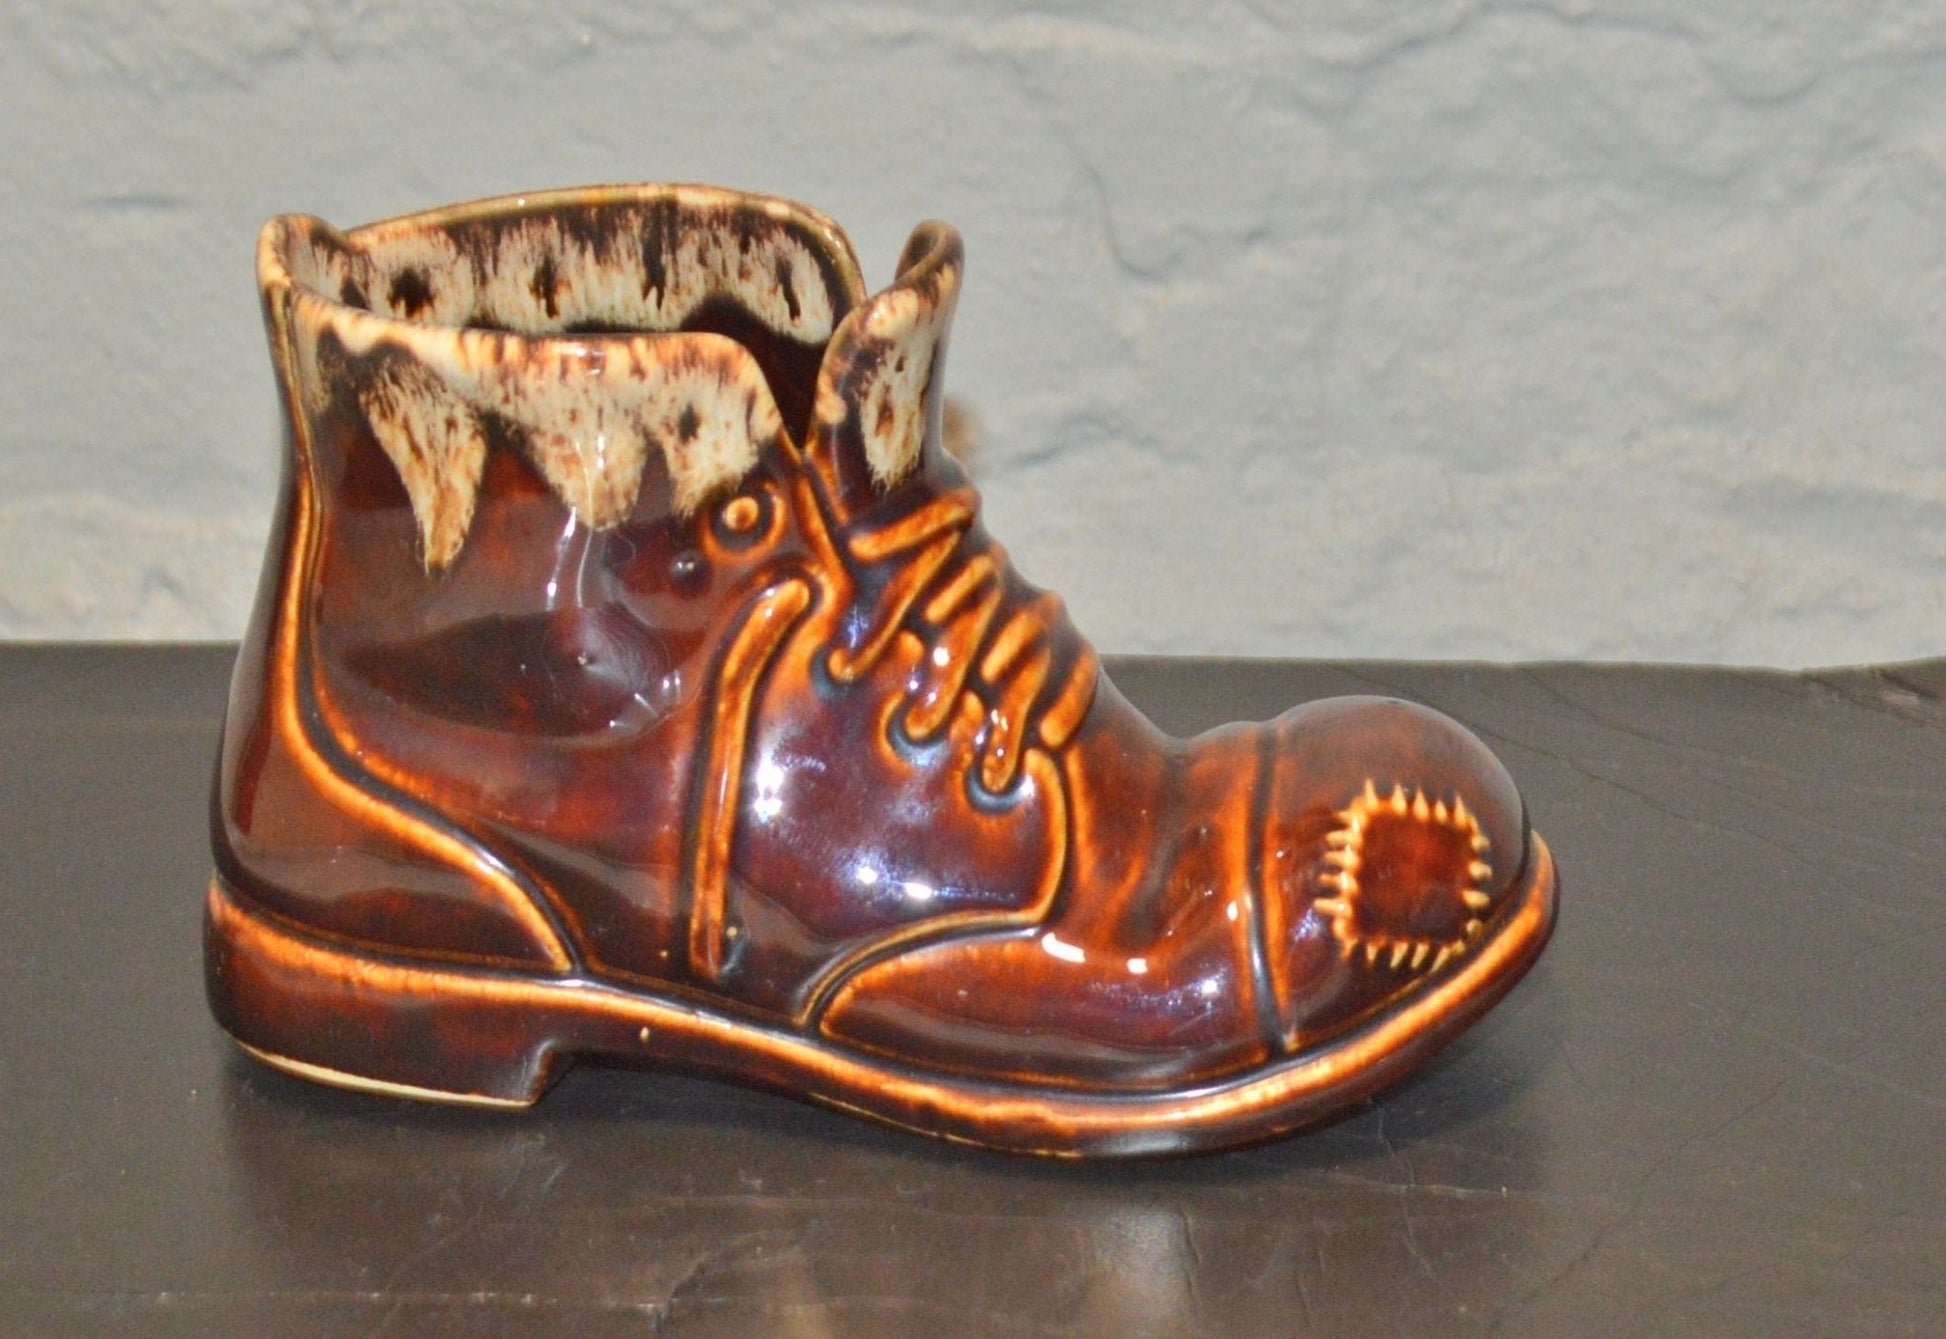 ORNAMENTAL BROWN BOOT(PREVIOUSLY OWNED) GOOD CONDITION - TMD167207